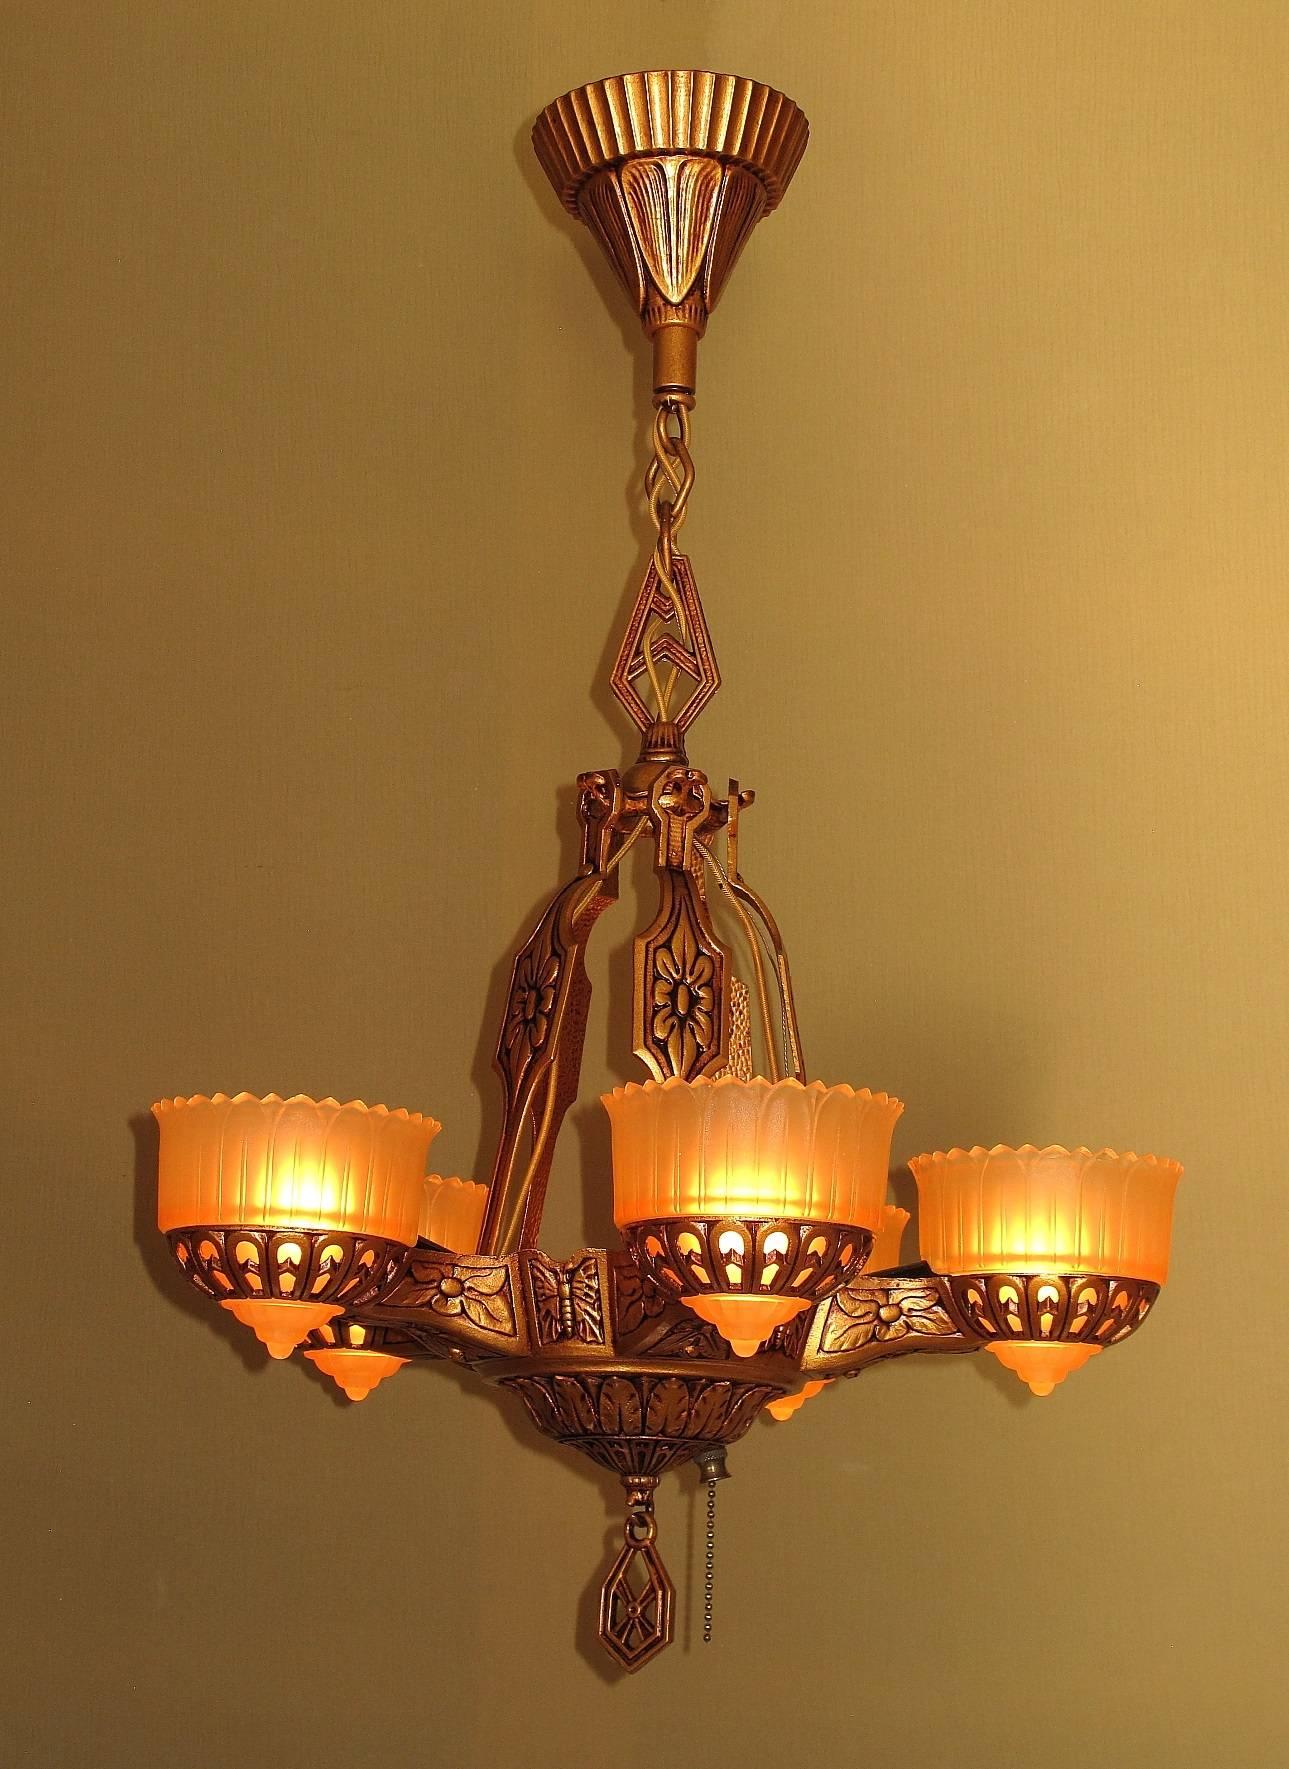 This would date to the late 1920s or early 1930s when Art Deco was in full bloom. Unique aspect of this chandelier, besides it's superb design and style, are butterflies which are cast between each arm of the fixture. Deco inspired floral patterns